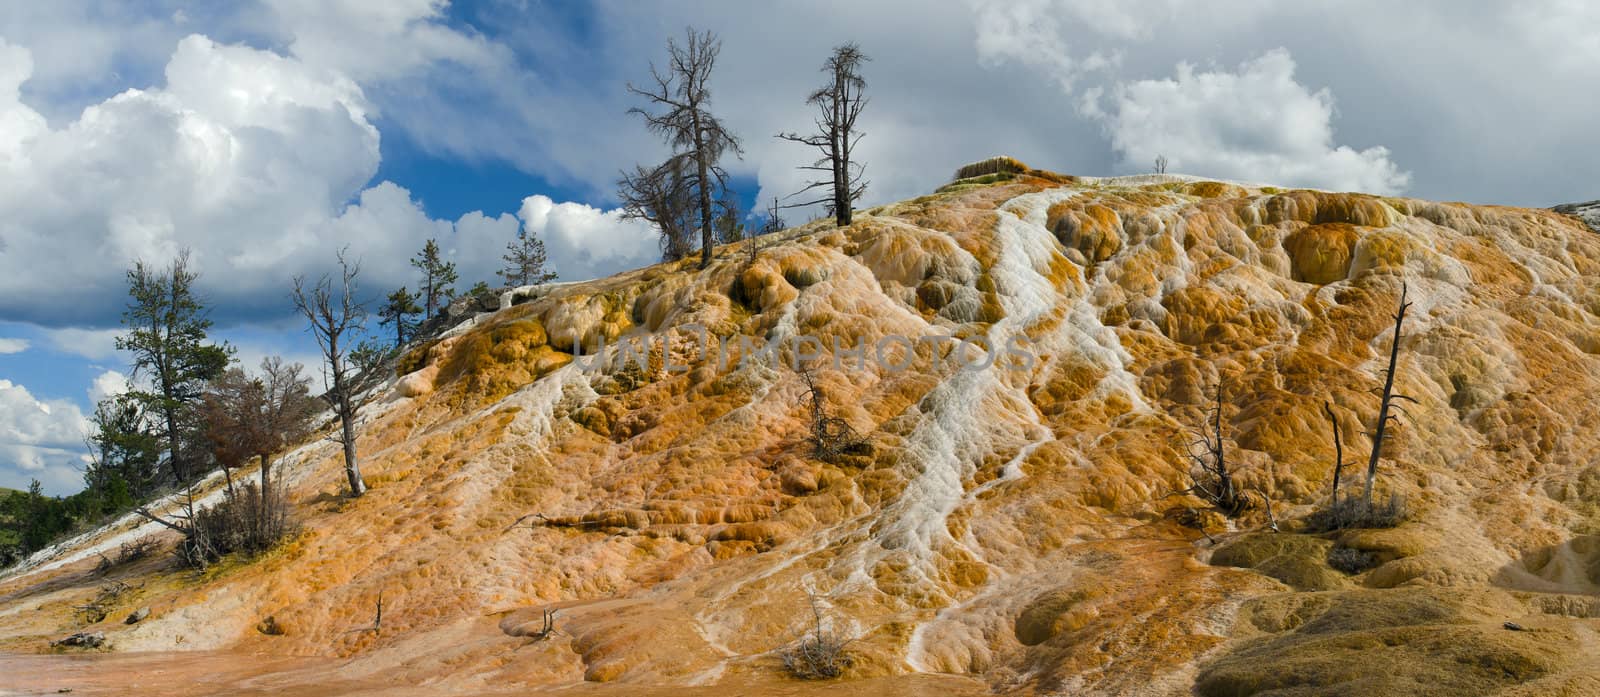 Panorama of travertine (limestone) mound formed by mineral deposition from hot springs, Palette Springs, Yellowstone National Park, Wyoming, USA